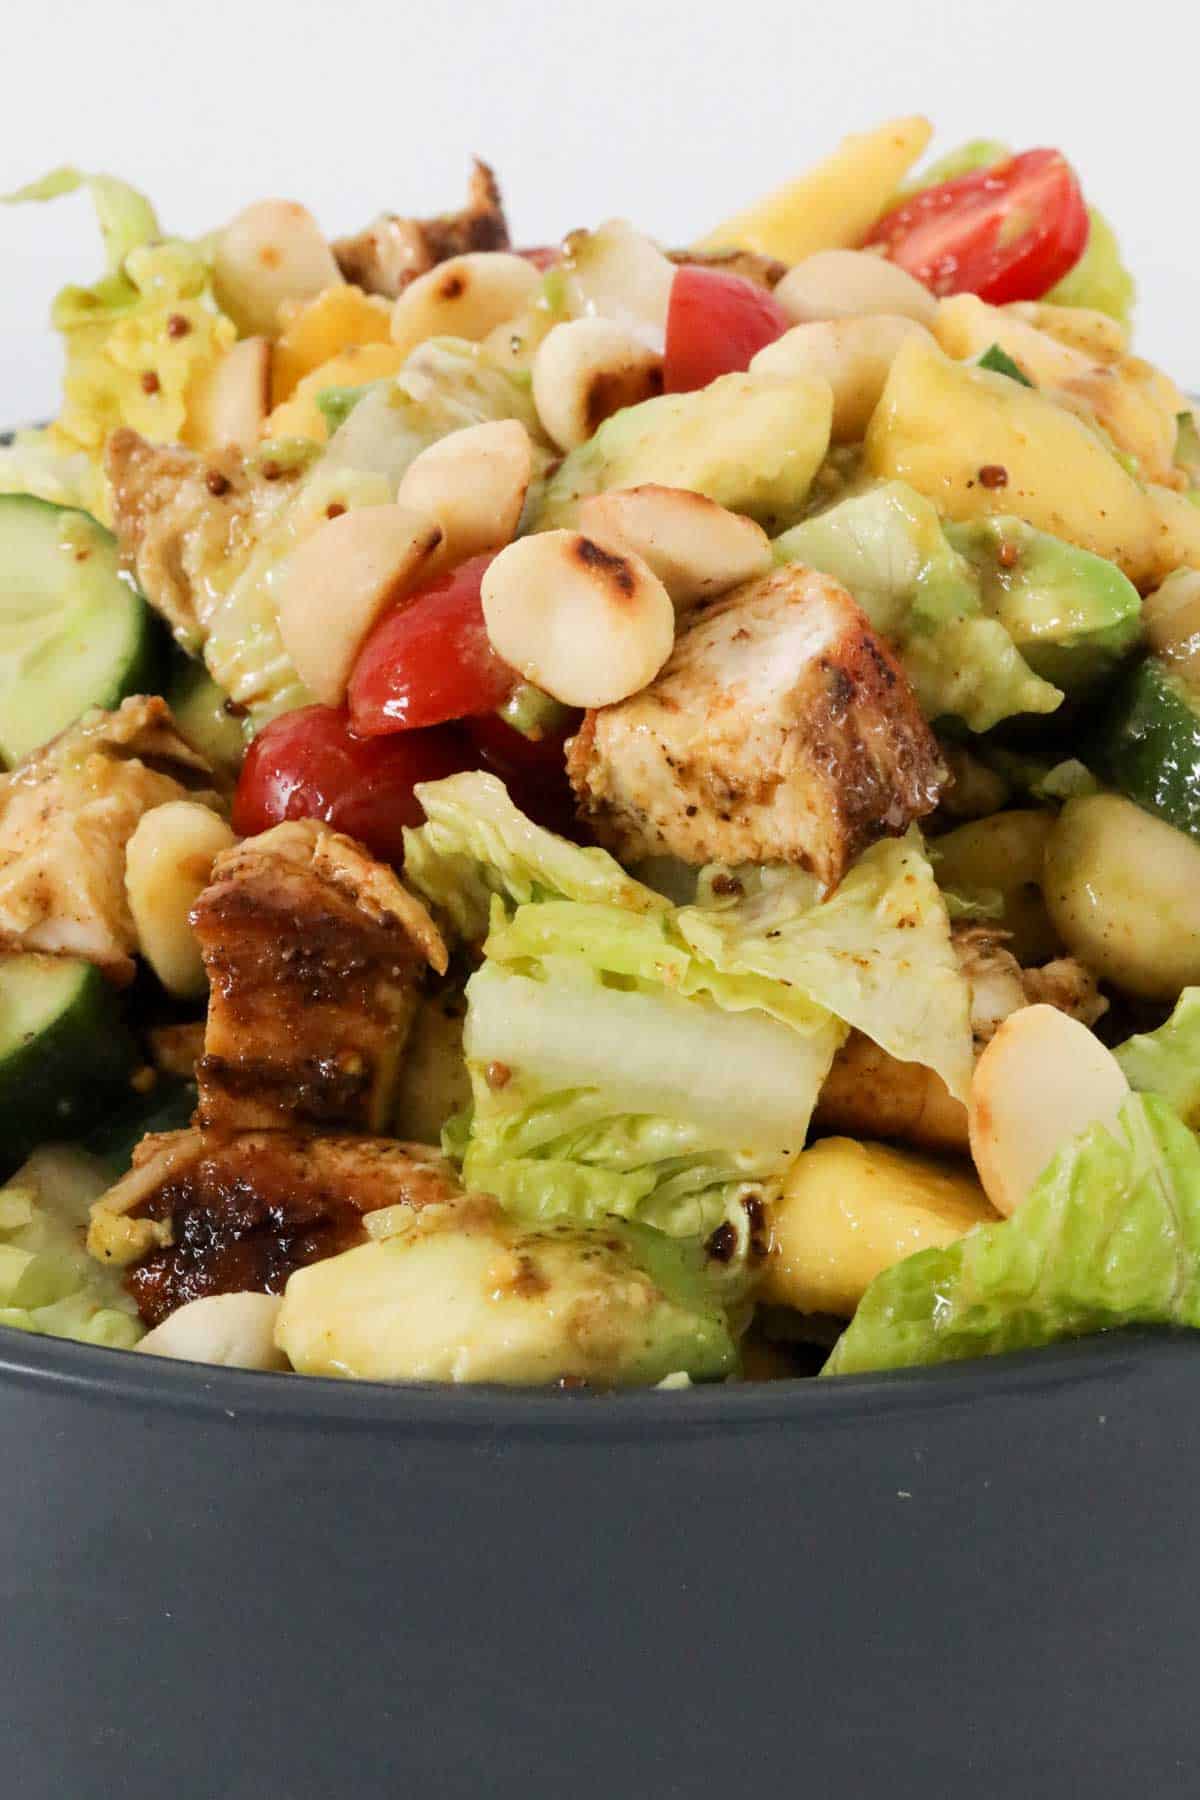 Close up of the dressed chicken salad ready to serve.